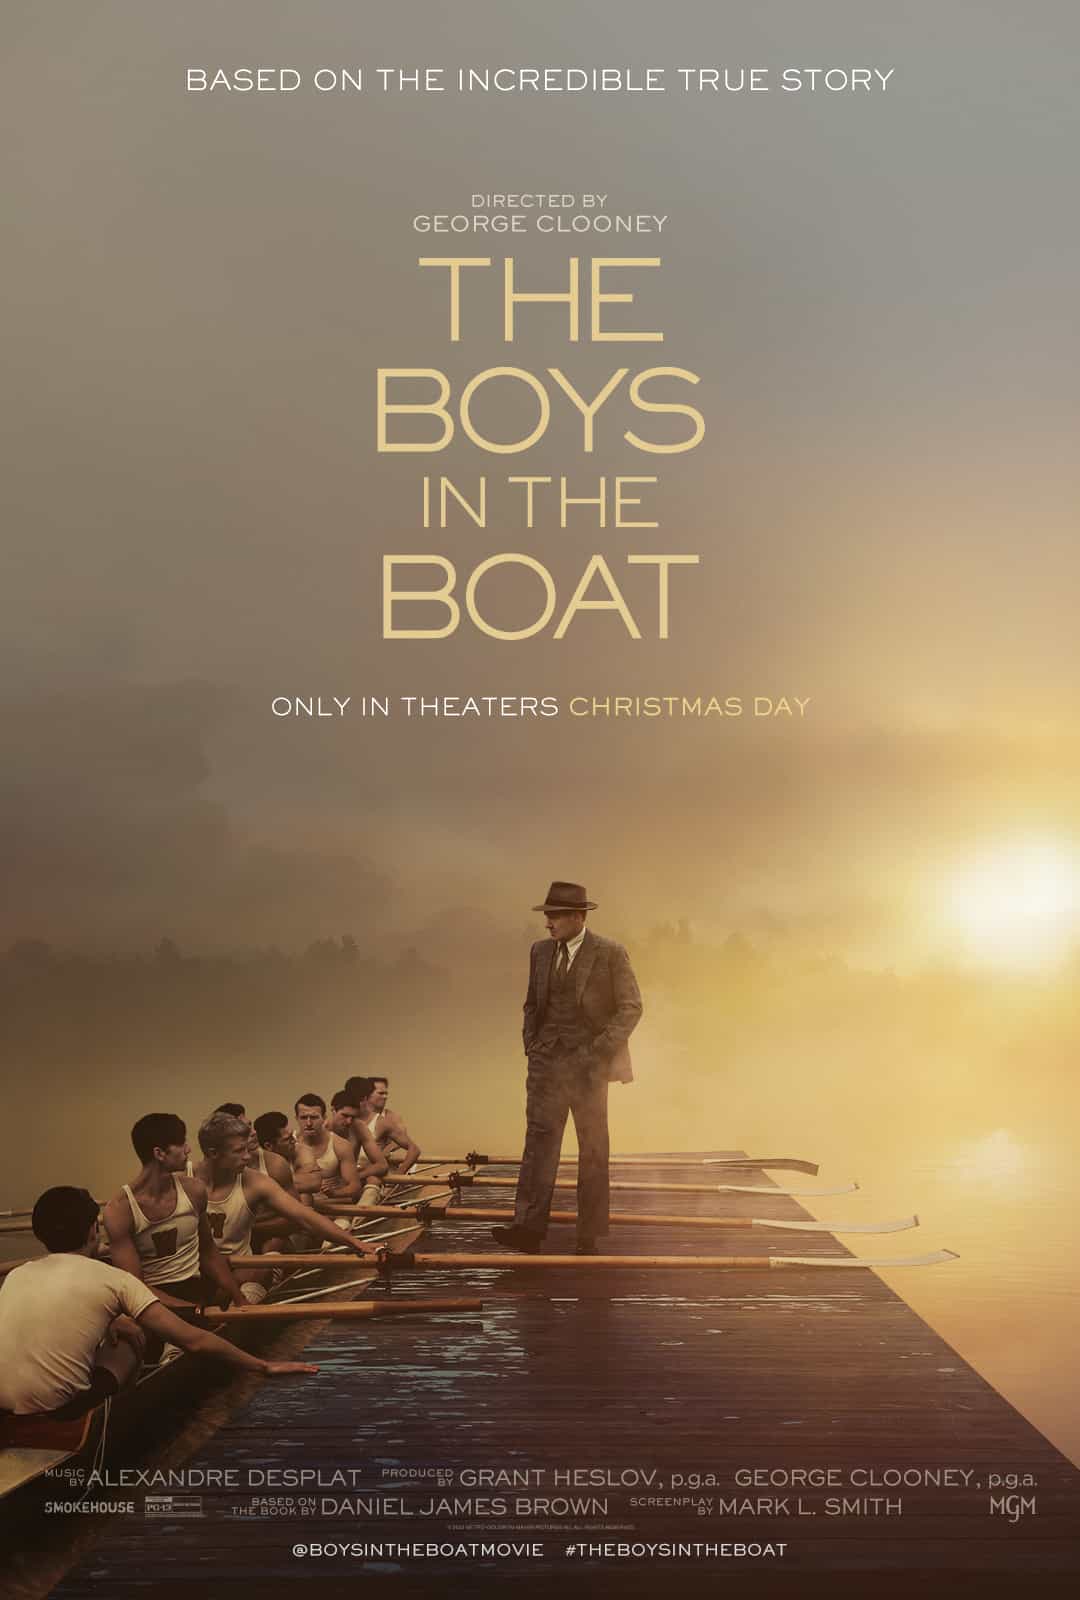 New poster has been released for The Boys In the Boat which stars Joel Edgerton and Courtney Henggeler - movie UK release date 12th January 2024 #theboysintheboat